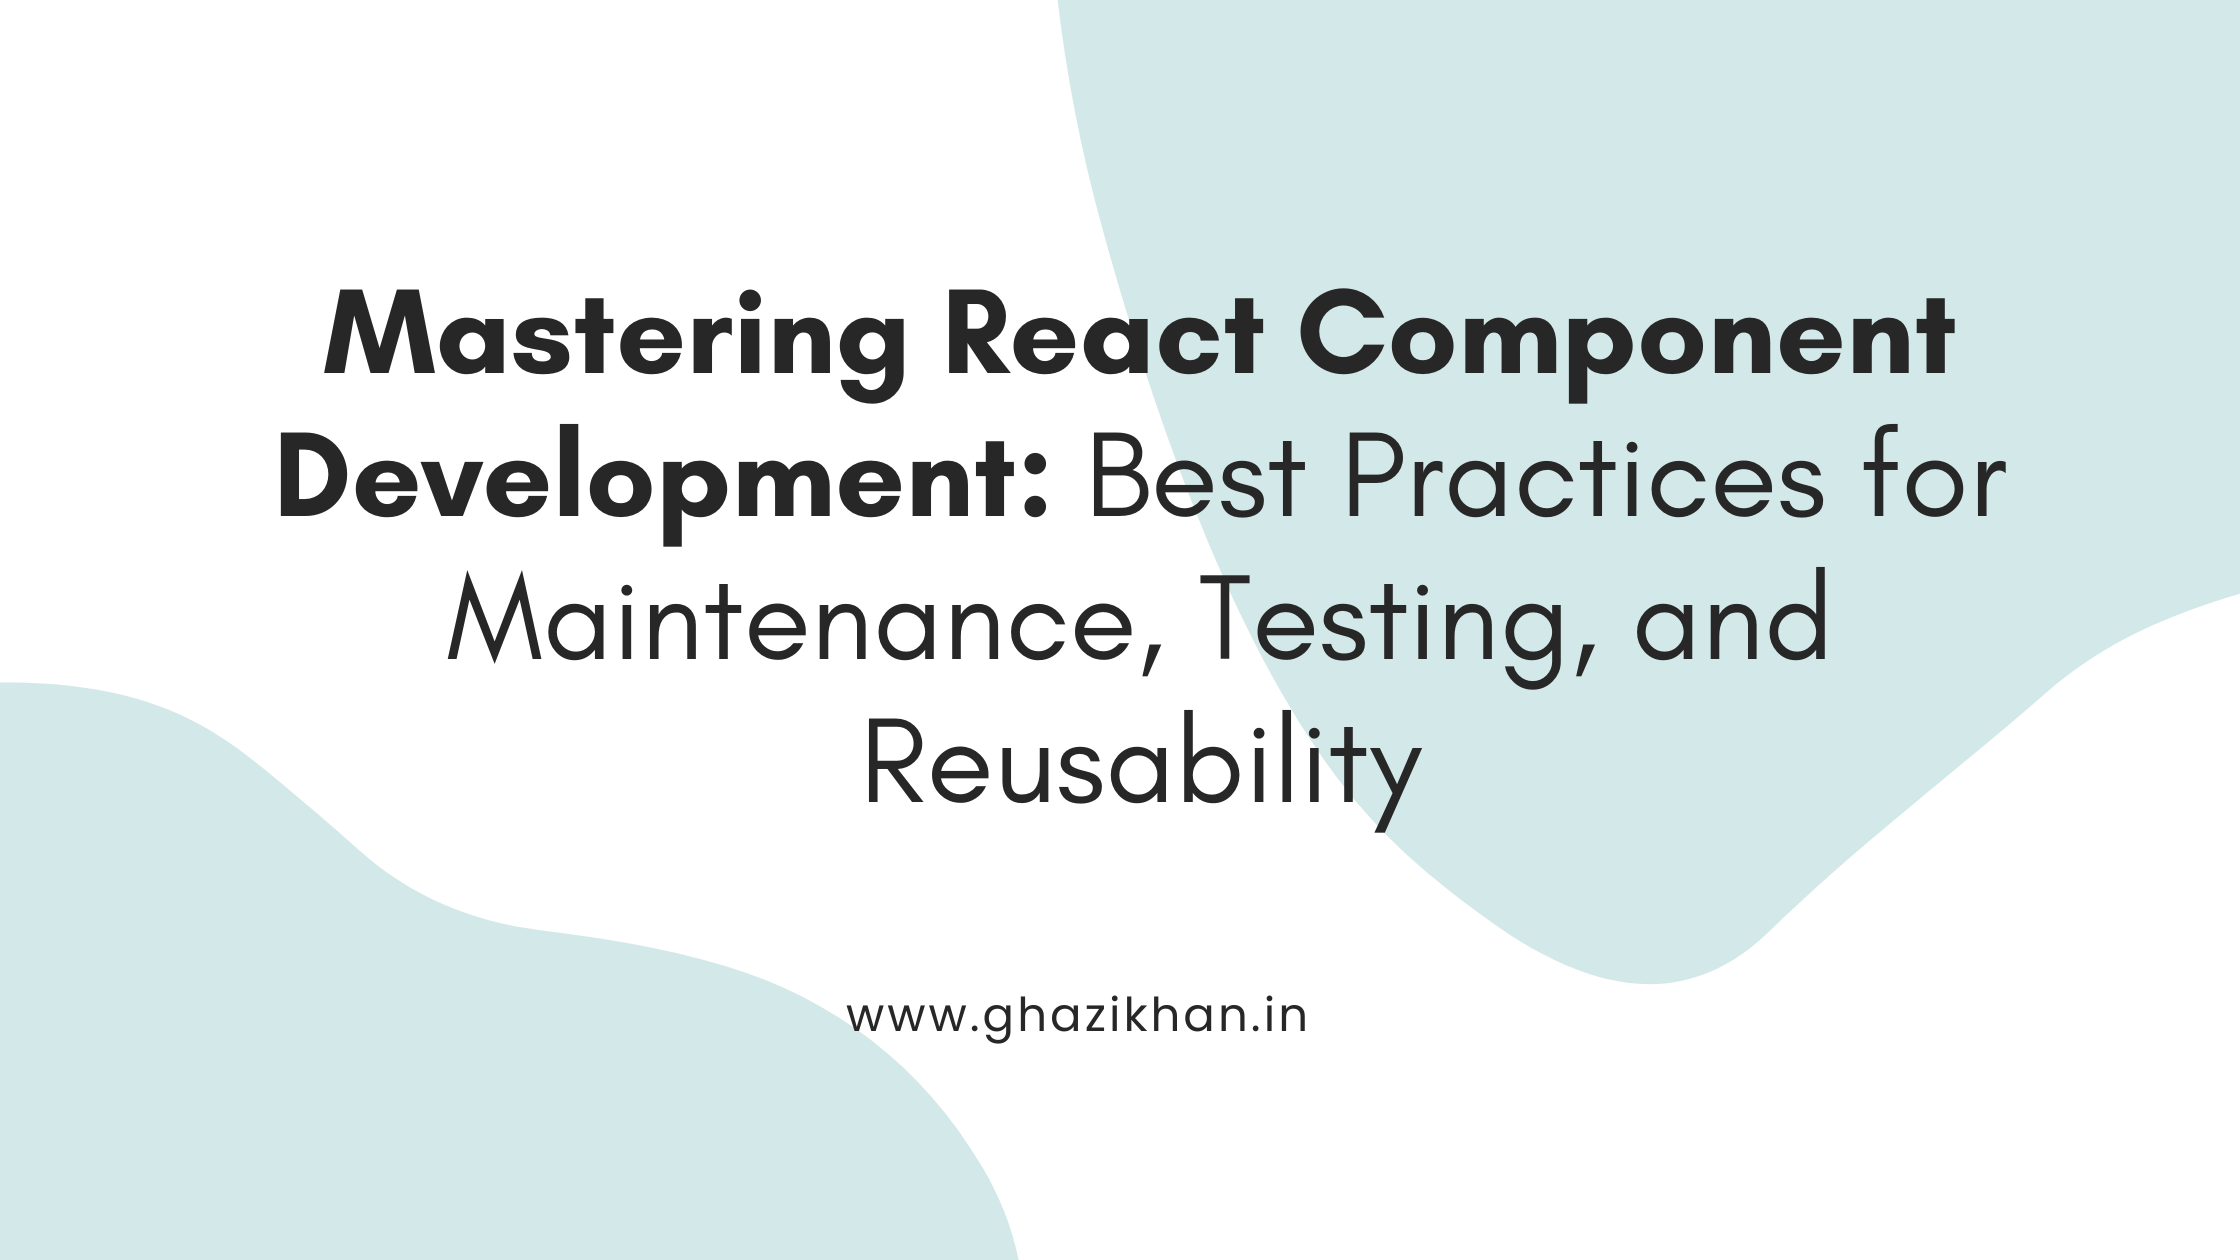 Mastering React Component Development: Best Practices for Maintenance, Testing, and Reusability